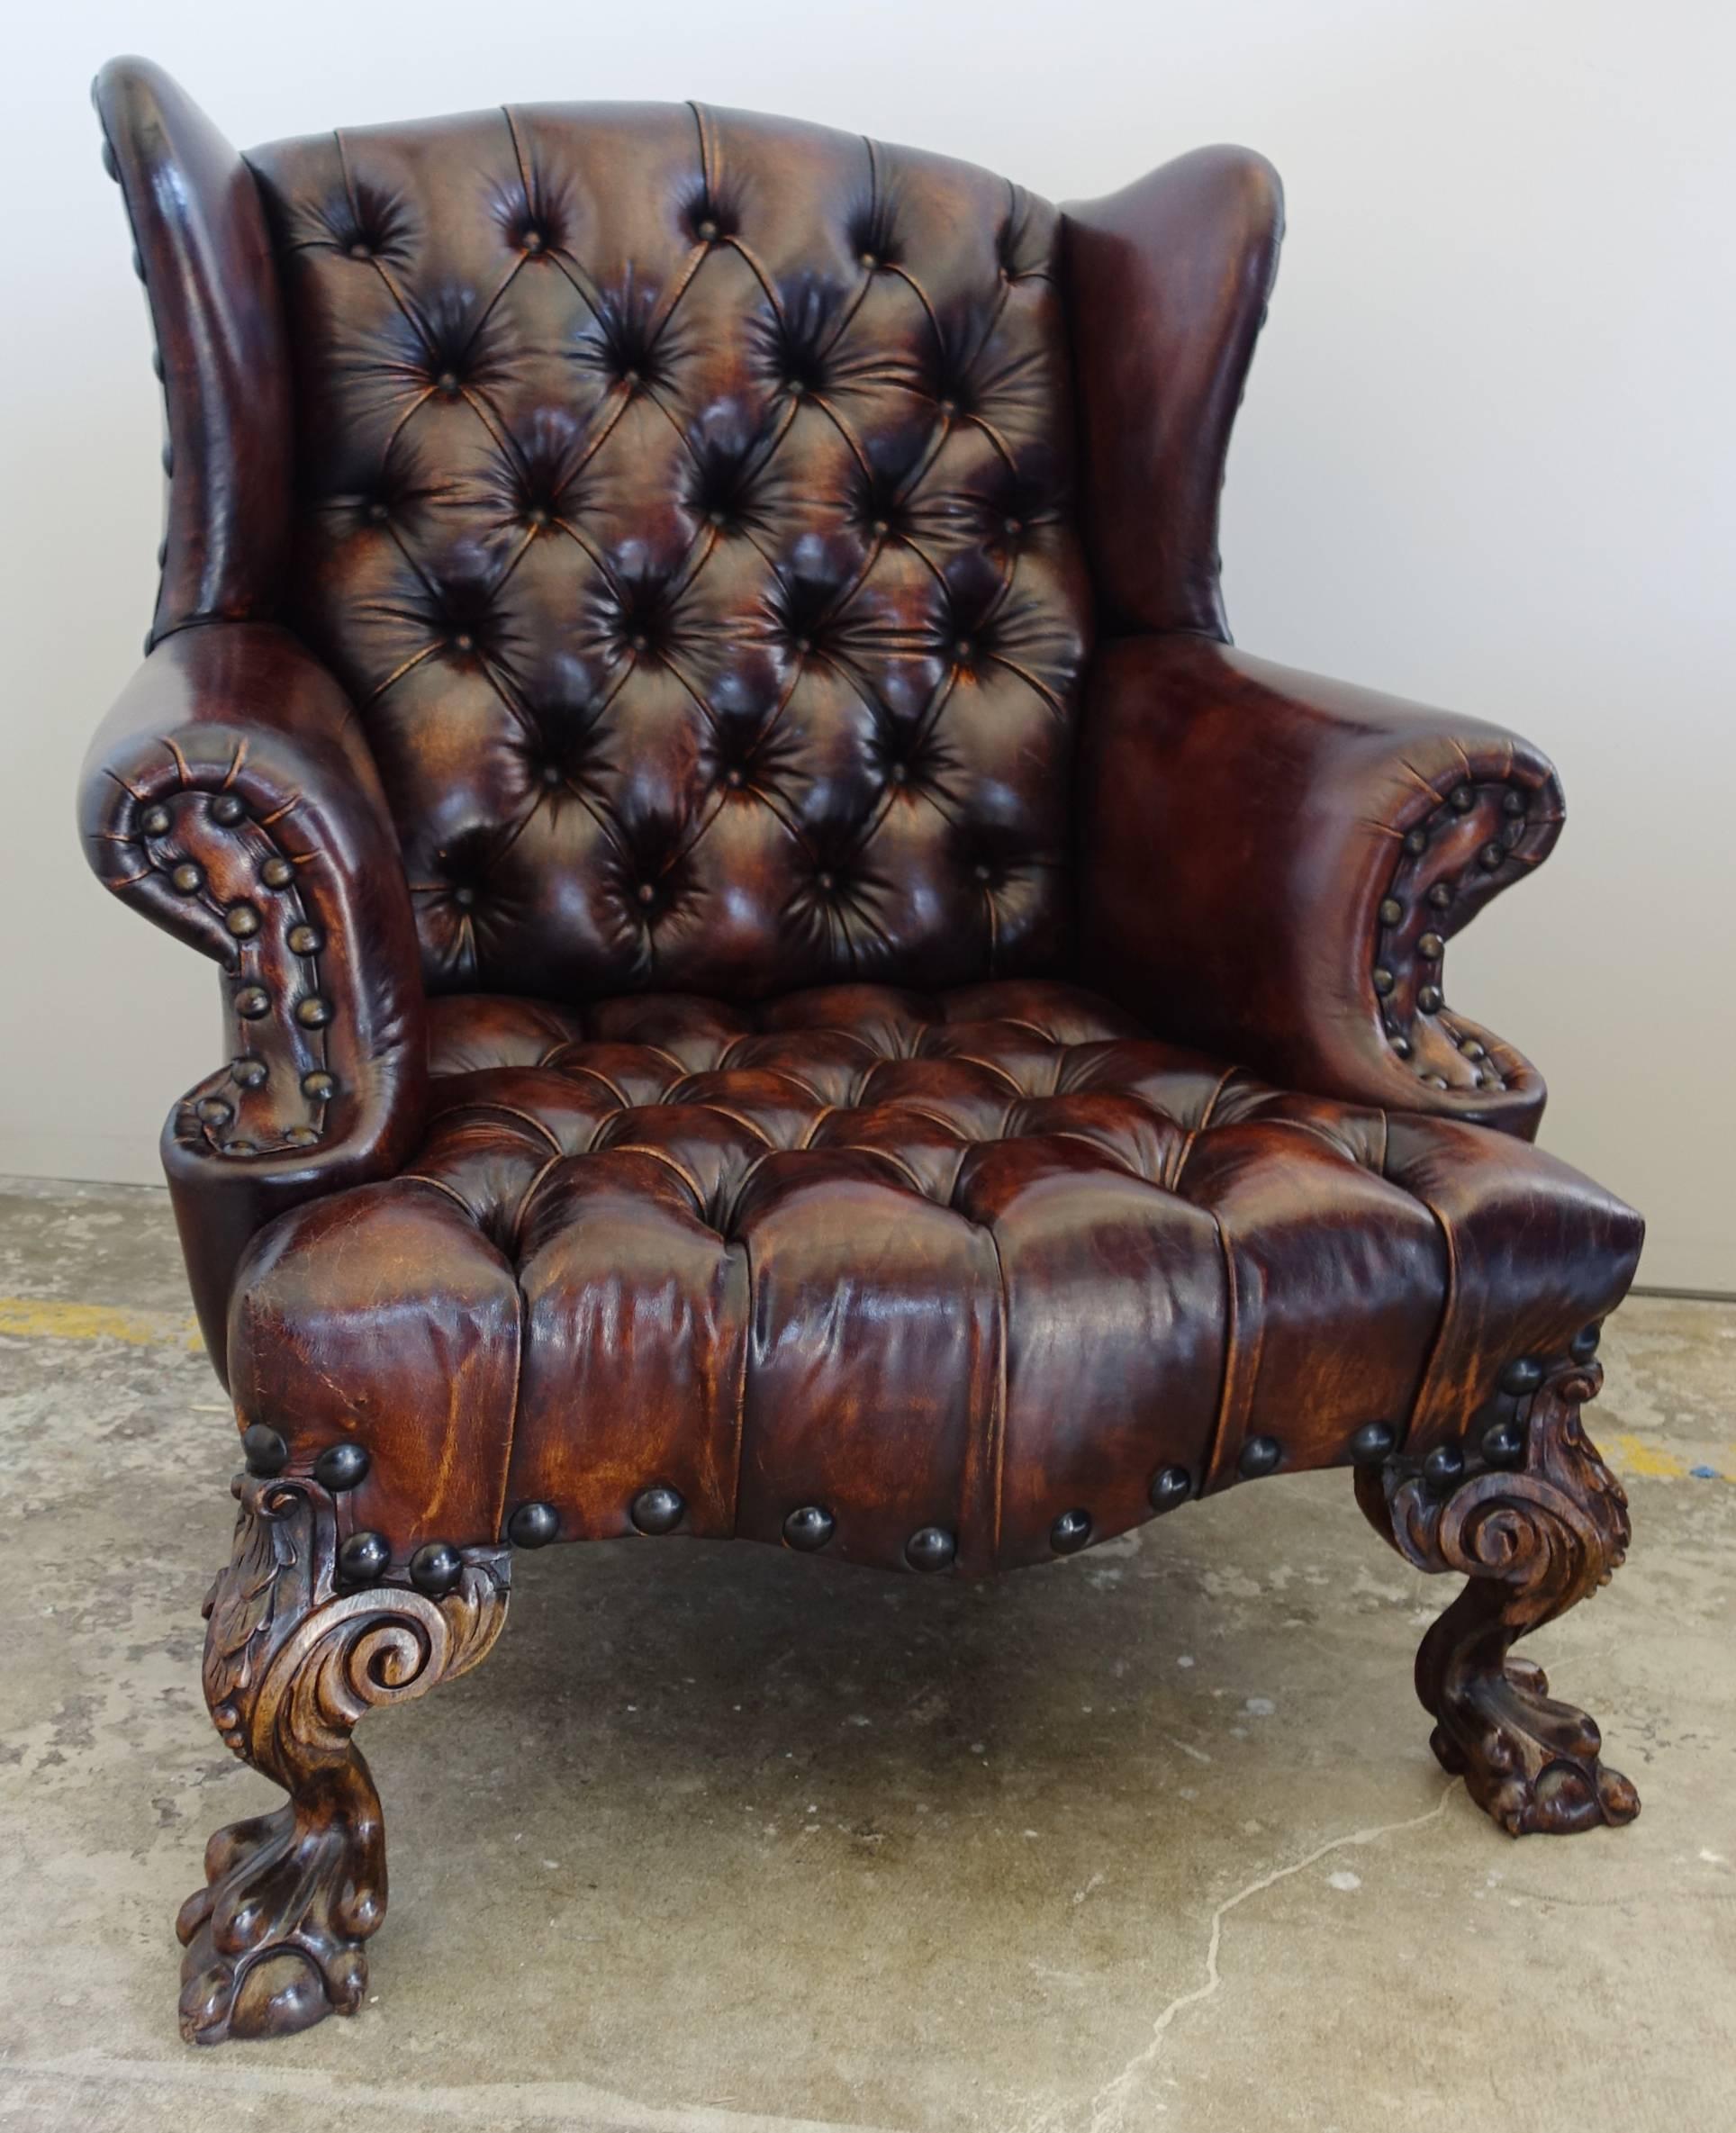 Pair of early 1900s English Chippendale style tufted leather wingback chairs with nailhead trim detail. The armchairs stand on heavily carved walnut claw and ball feet in front. The cognac colored leather has distressing but remains in pristine